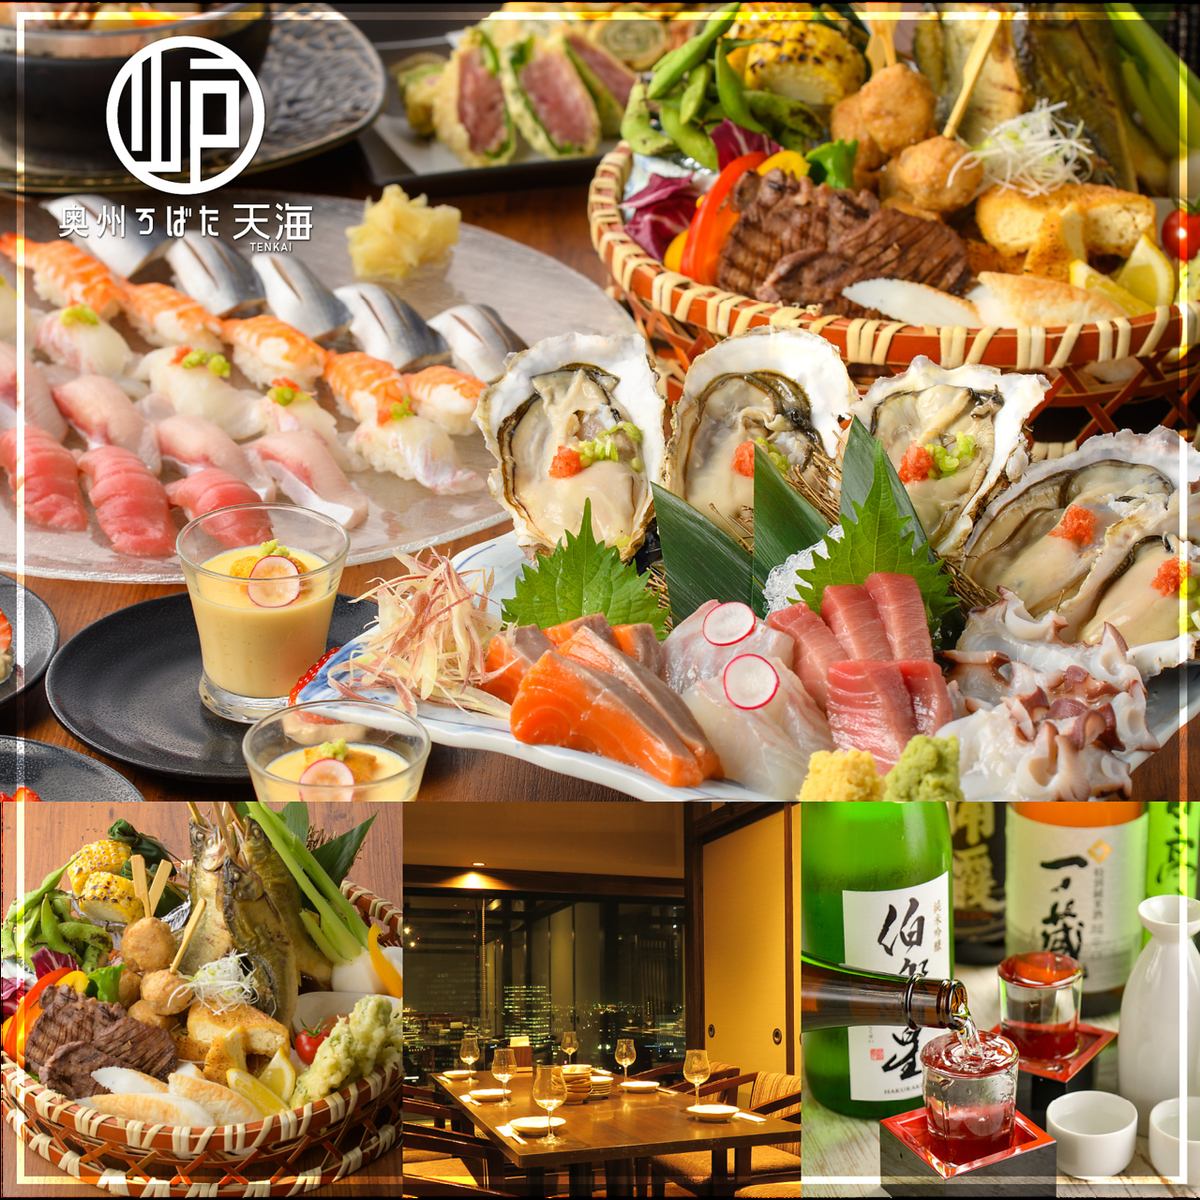 Private banquets available for up to 80 people! Courses with all-you-can-drink options start from 4,000 yen! Private rooms available for 4 to 20 people